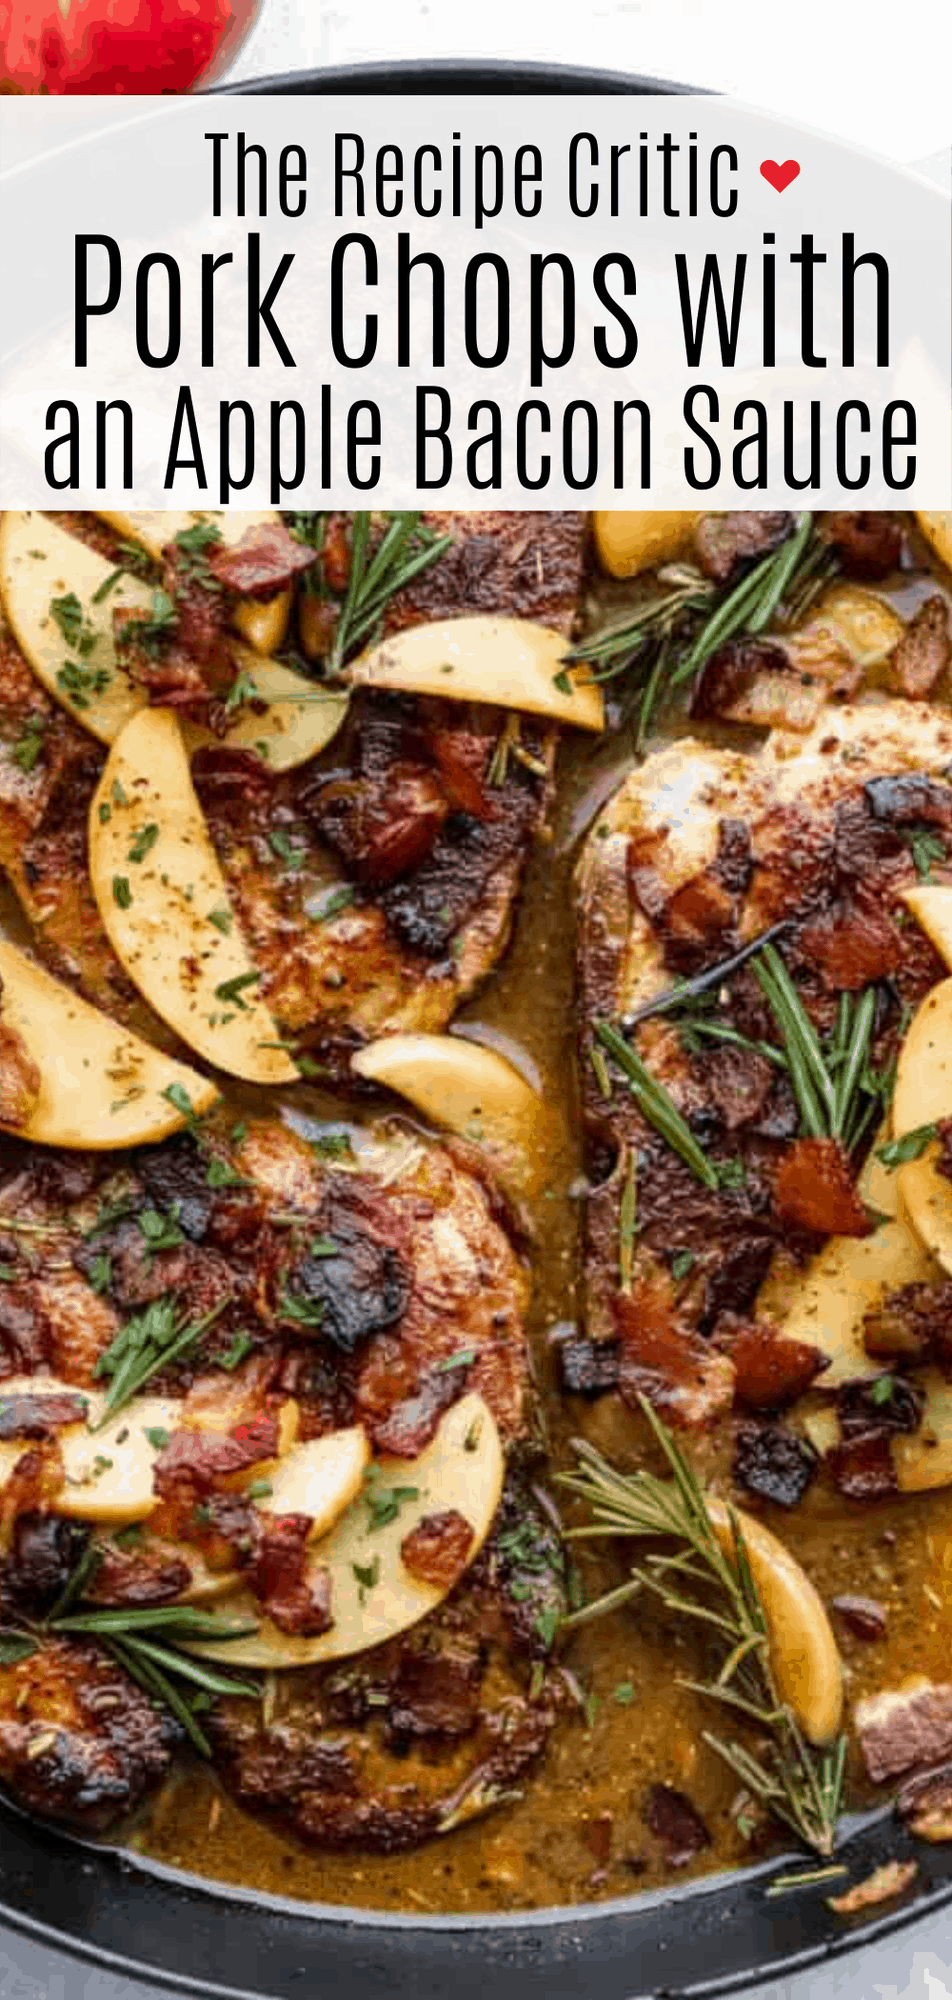 Pork Chops with Apples in an Apple Bacon Sauce - 79